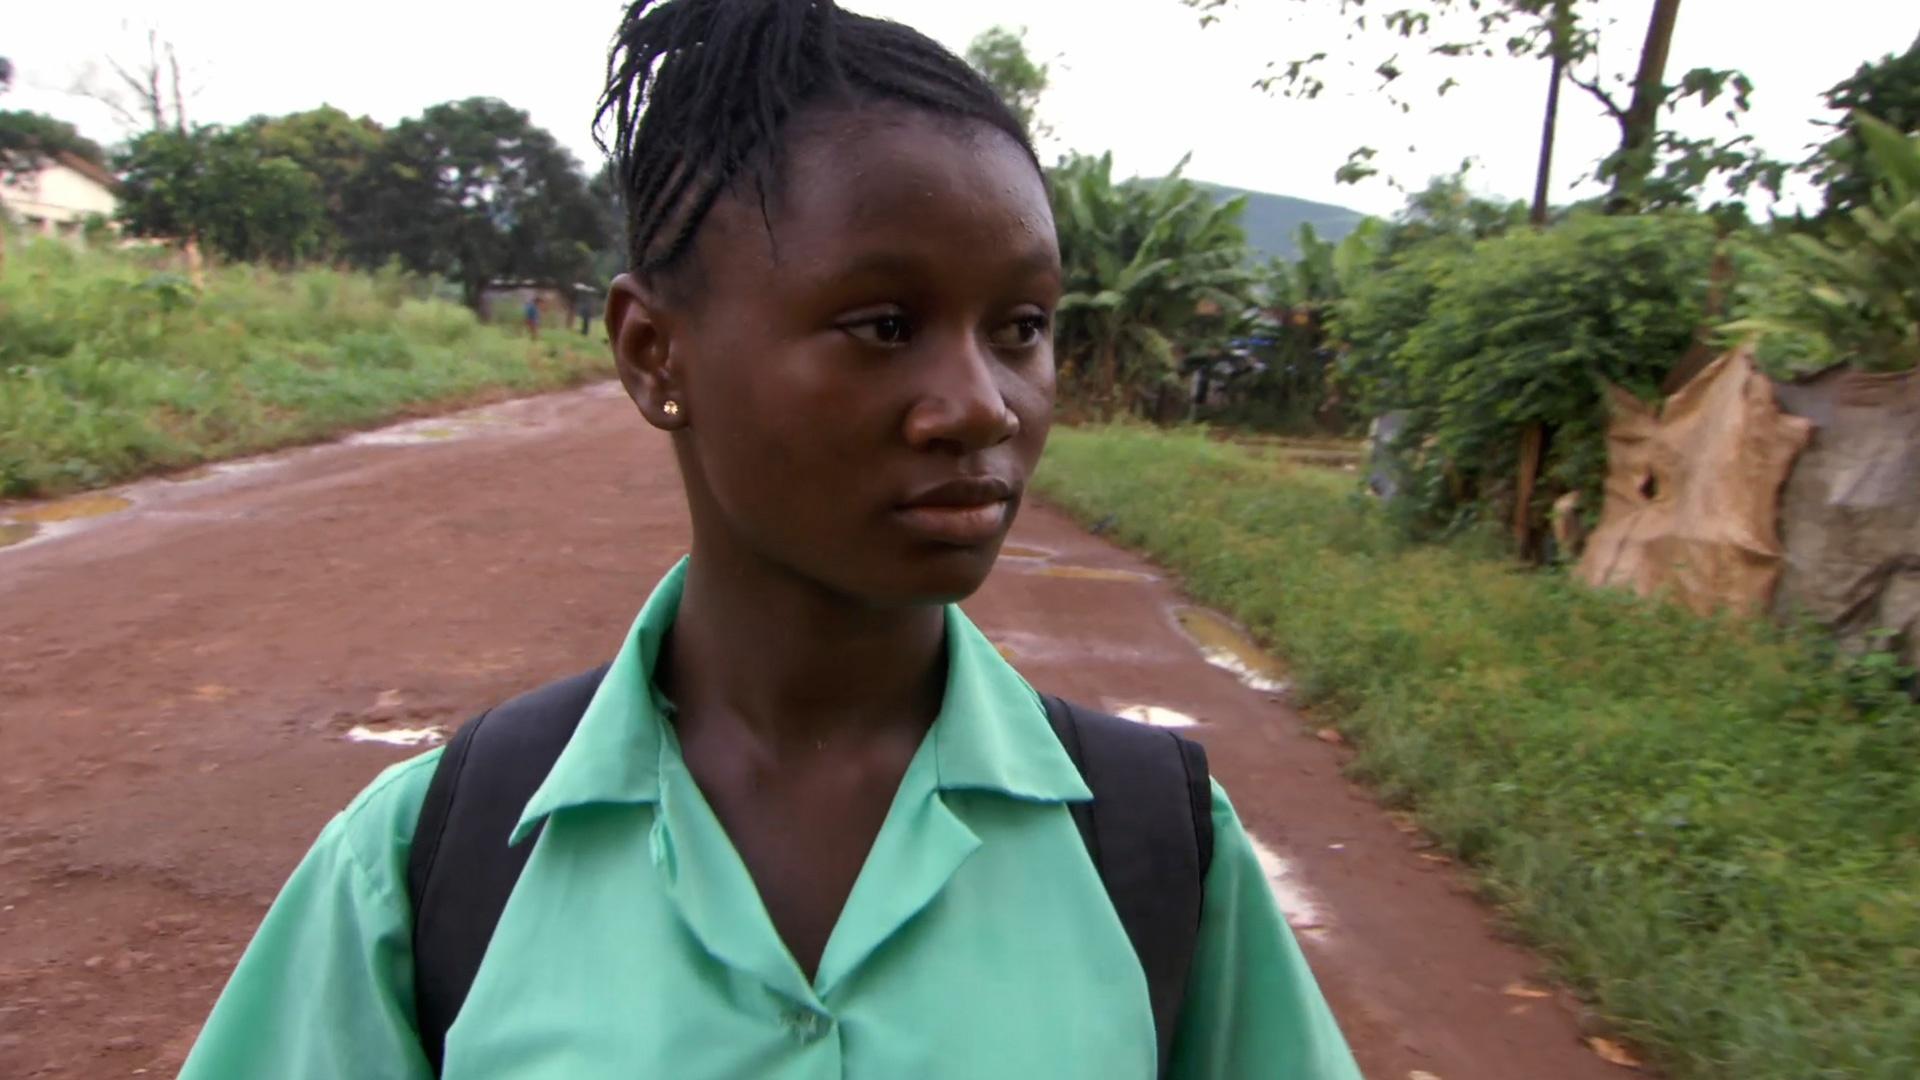 Saxe New School Girl - Independent Lens | Half the Sky: One Girl's Long Road to School and Safety  in S | Season 1 | Episode 1 | PBS